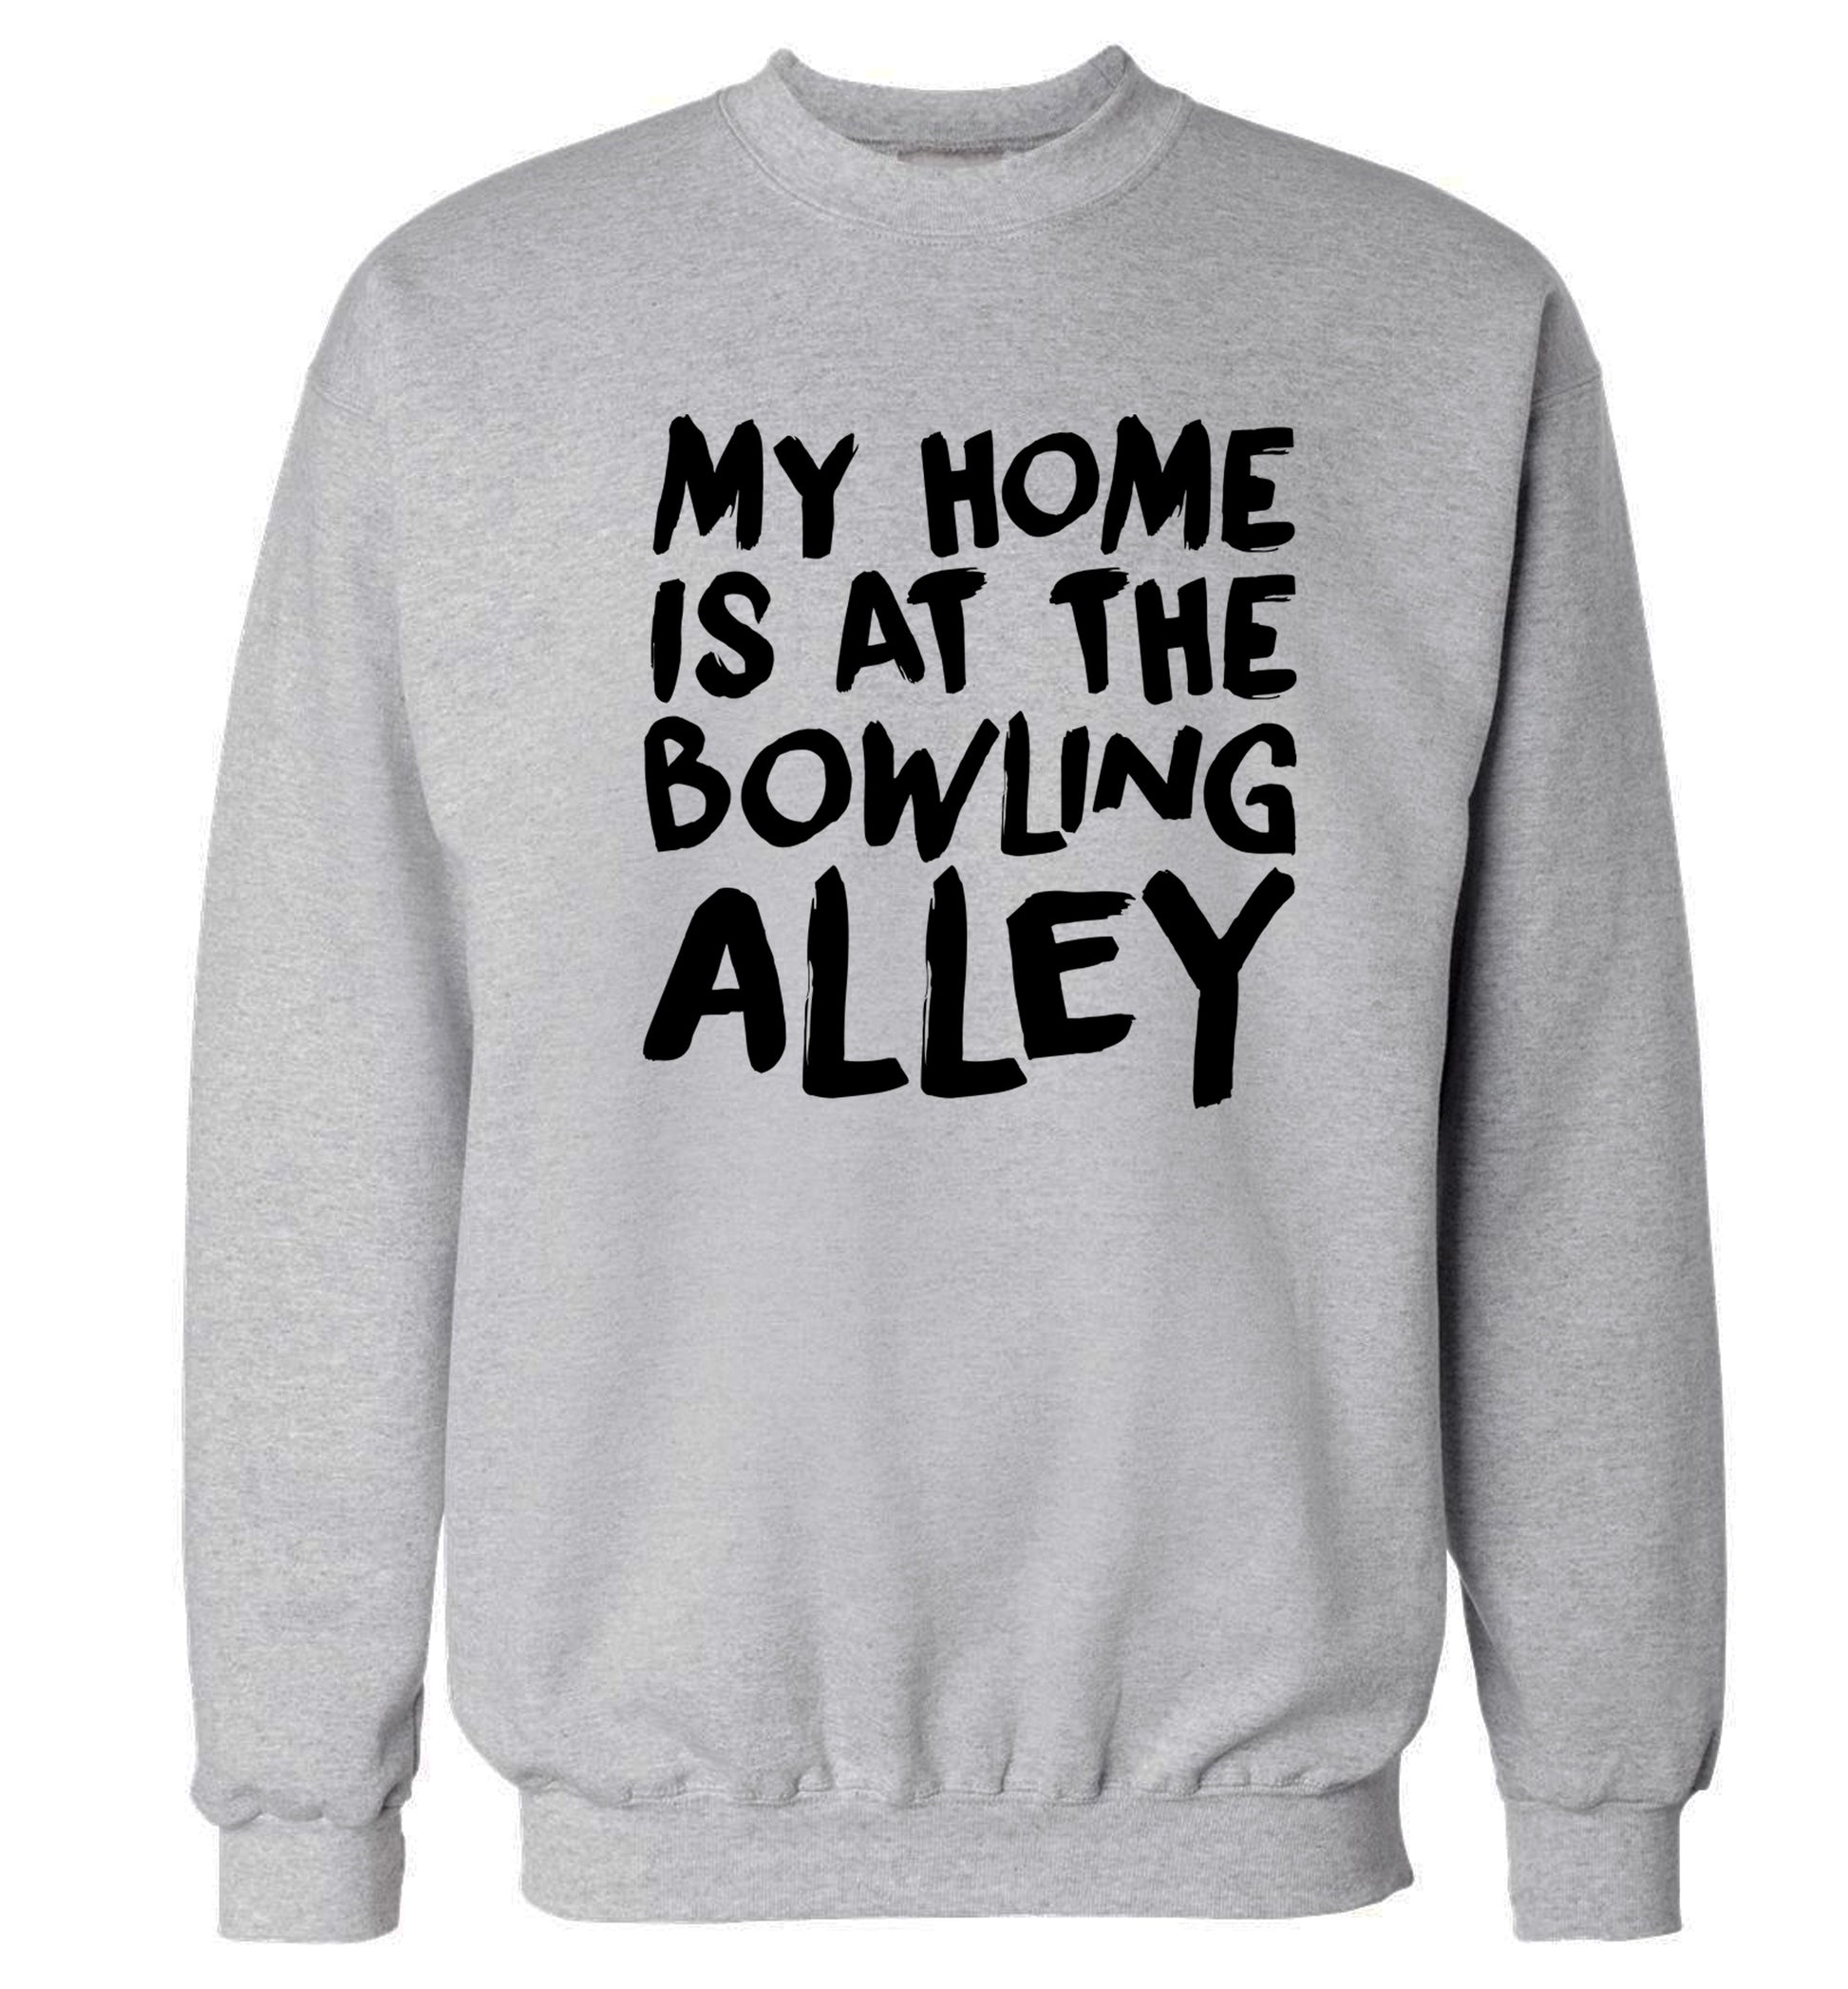 My home is at the bowling alley Adult's unisex grey Sweater 2XL